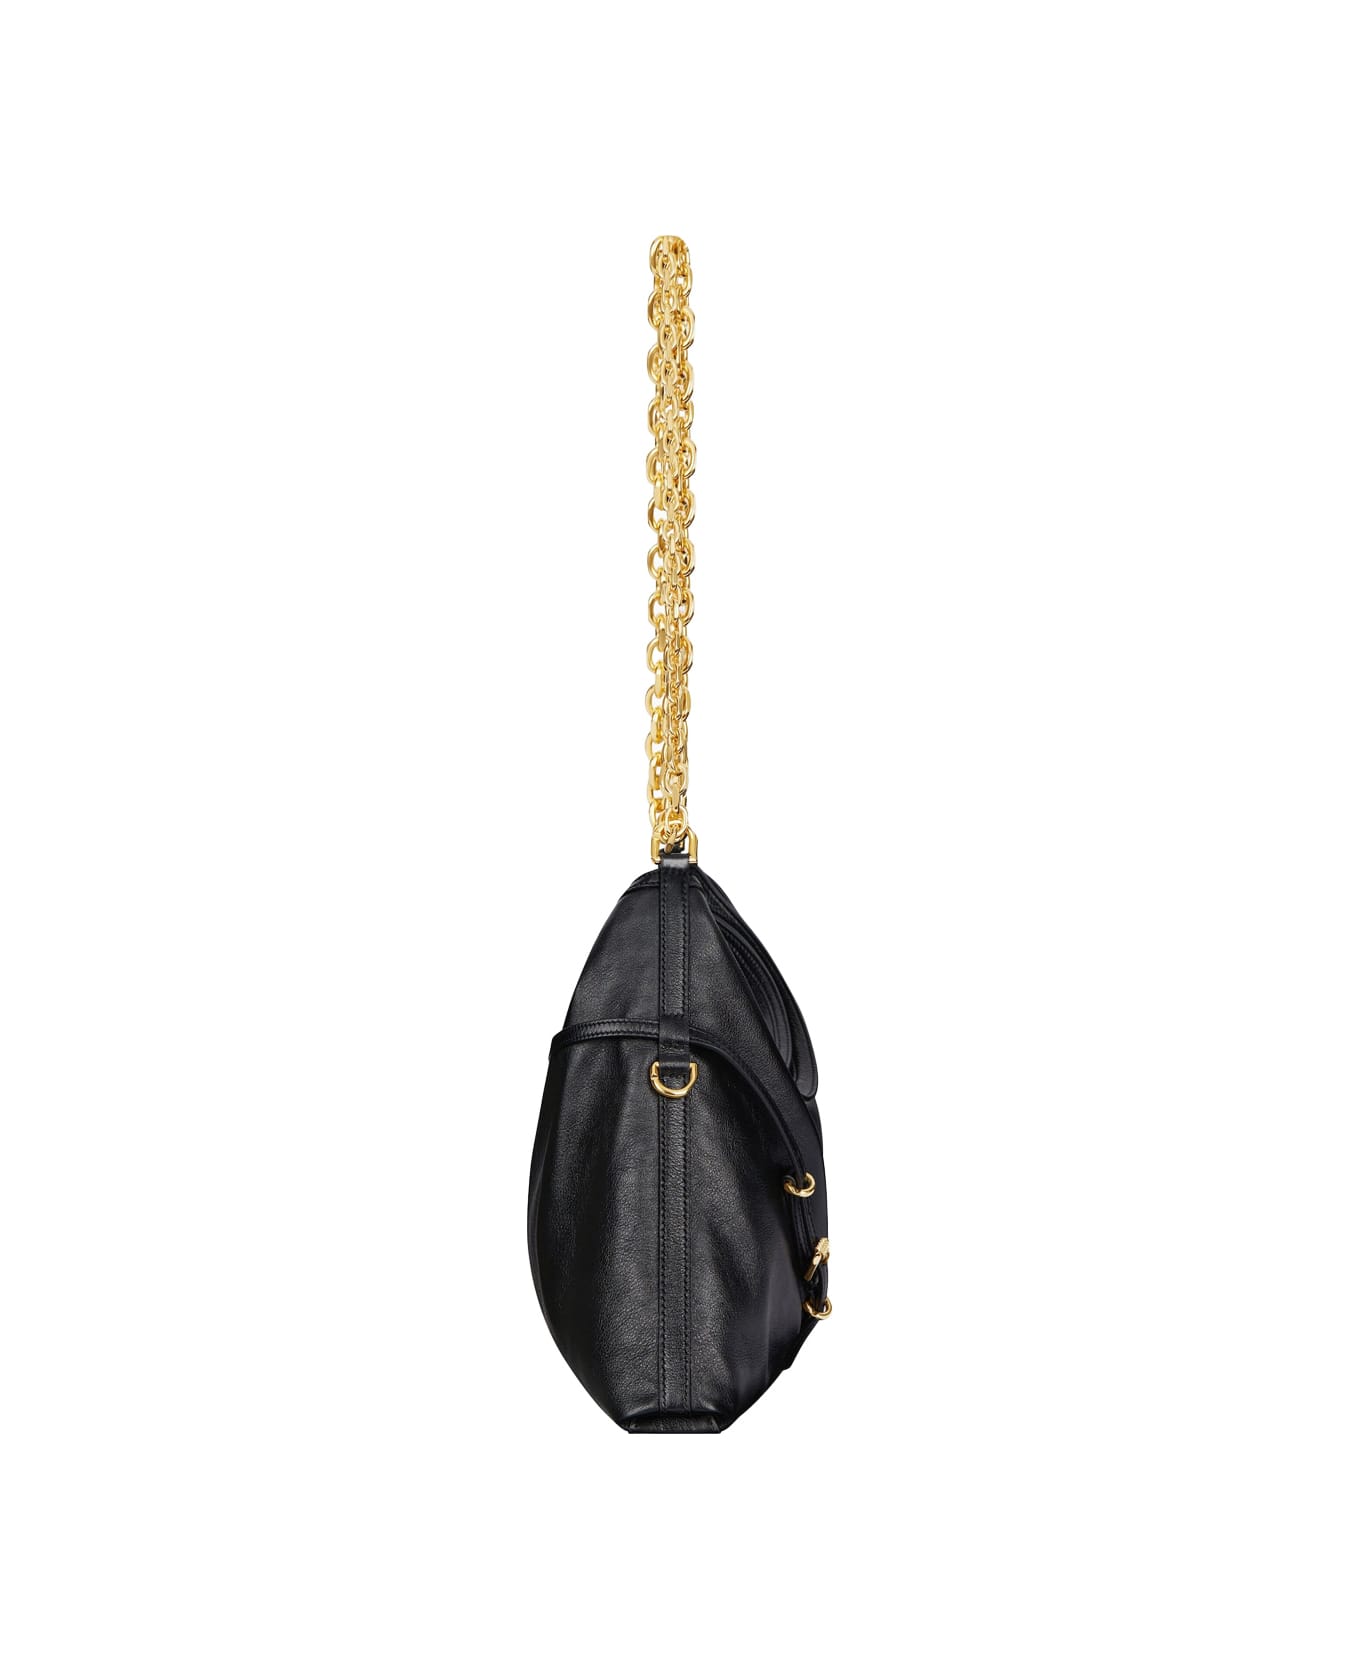 Givenchy Voyou Chain Medium Bag In Black Leather - Black